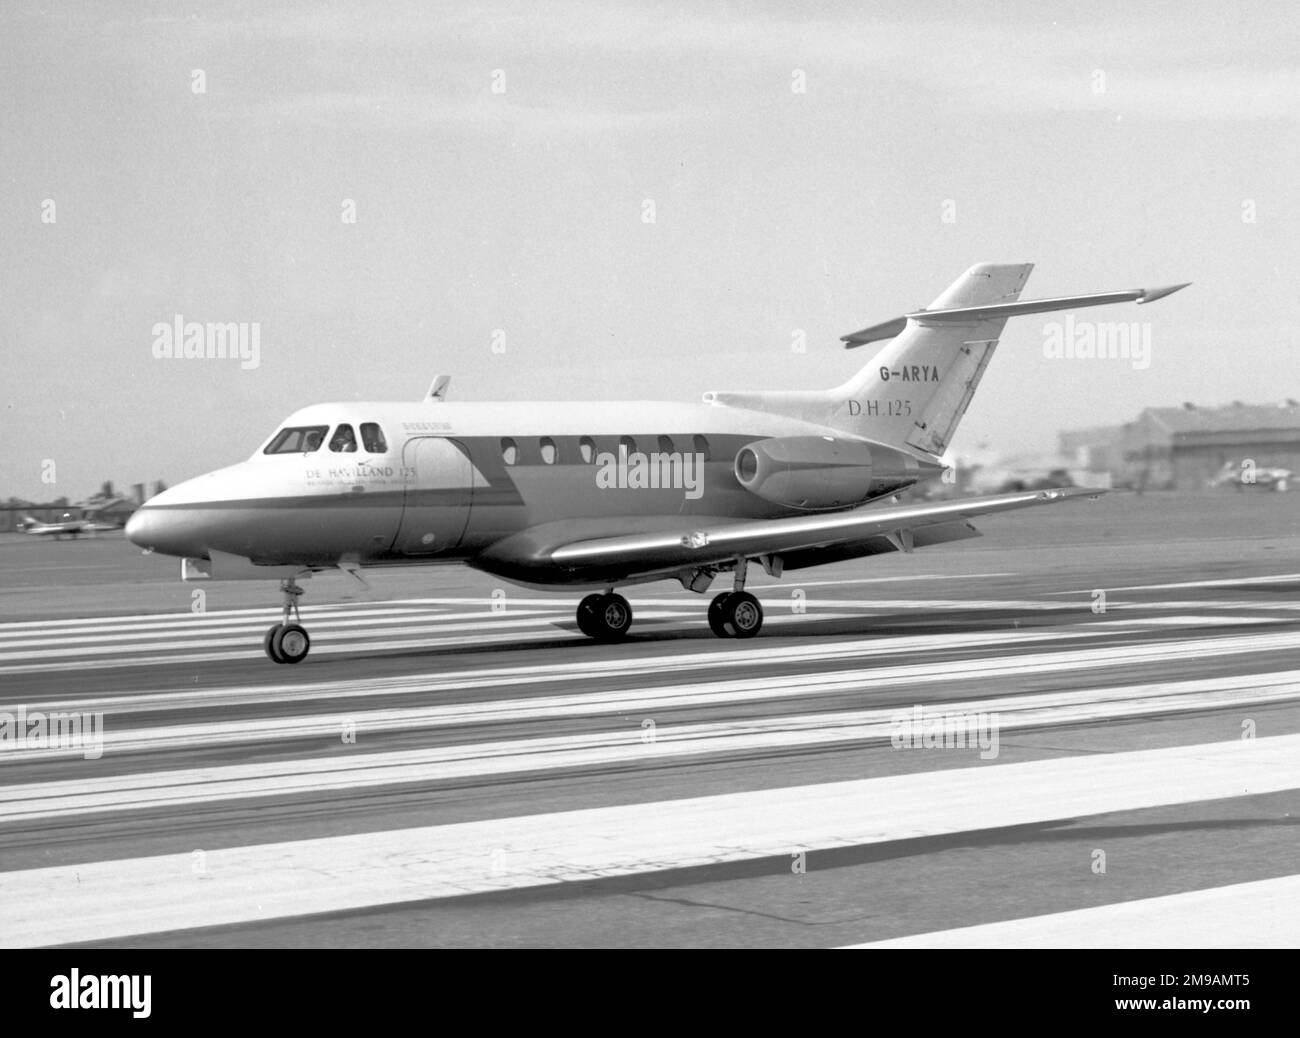 de Havilland DH.125 G-ARYA (msn 25001), prototype of the DH.125 - HS-125 - BAe 125 line, on the piano keys, ready for take-off, at the SBAC Farhborough Air Show, held from 3-9 September 1962. This aircraft is now preserved at the Mosquito Museum. Stock Photo